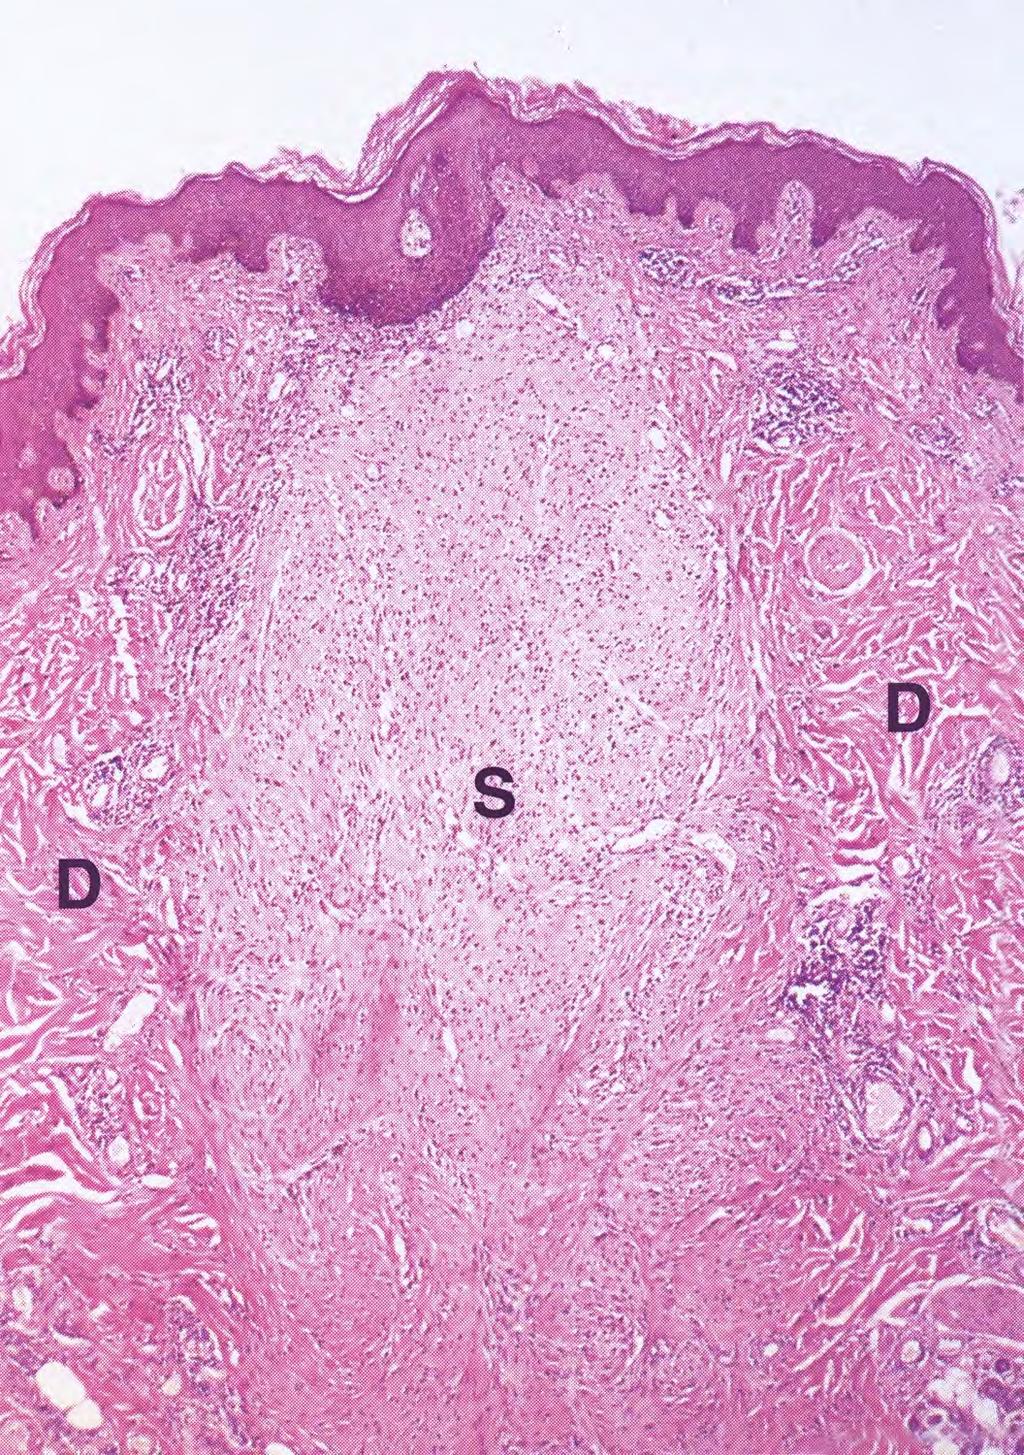 Skin, early fibrous scar (S) with normal dermis (D) on either side, low power.